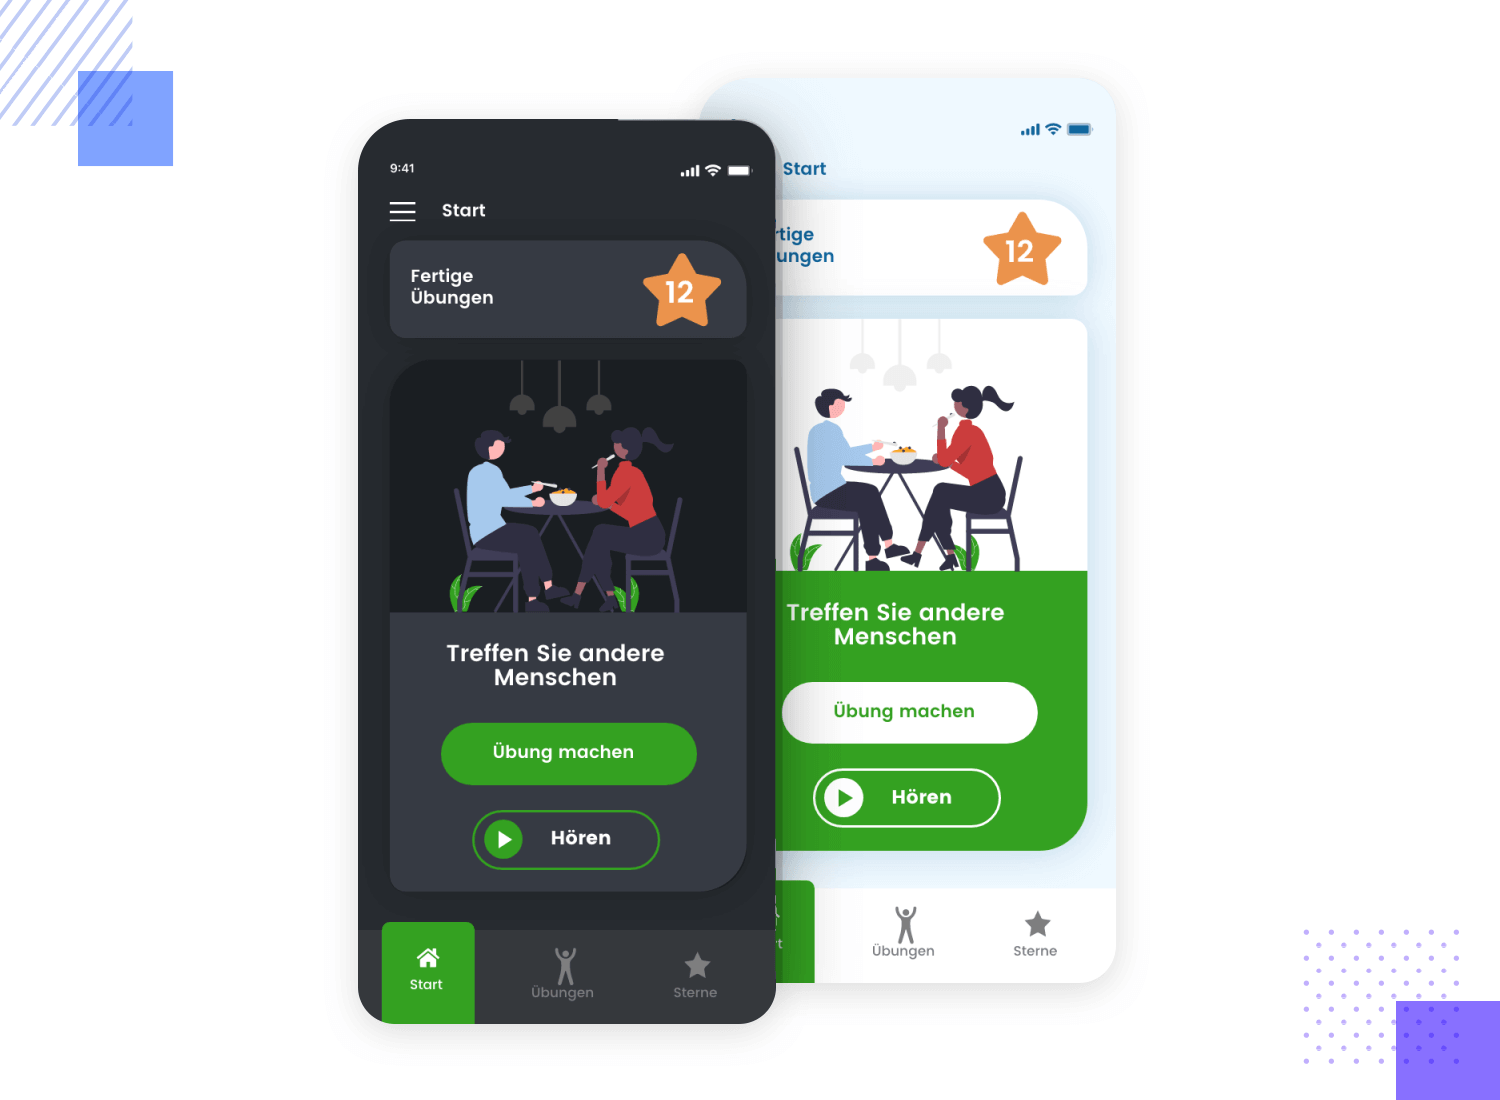 UI design showcasing interactive exercise app buttons for easy navigation